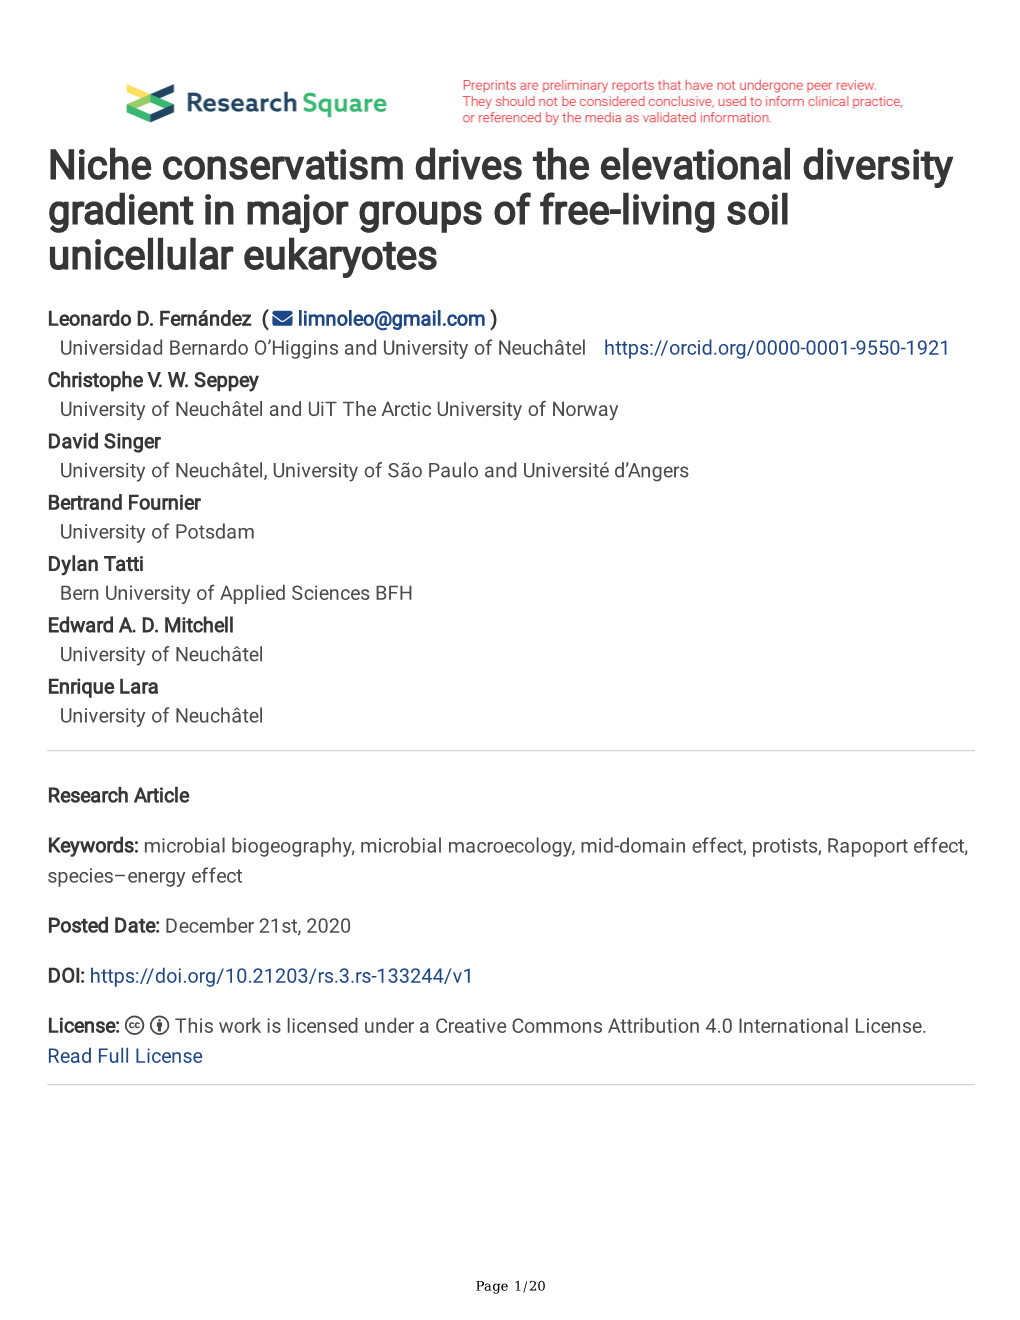 Niche Conservatism Drives the Elevational Diversity Gradient in Major Groups of Free-Living Soil Unicellular Eukaryotes